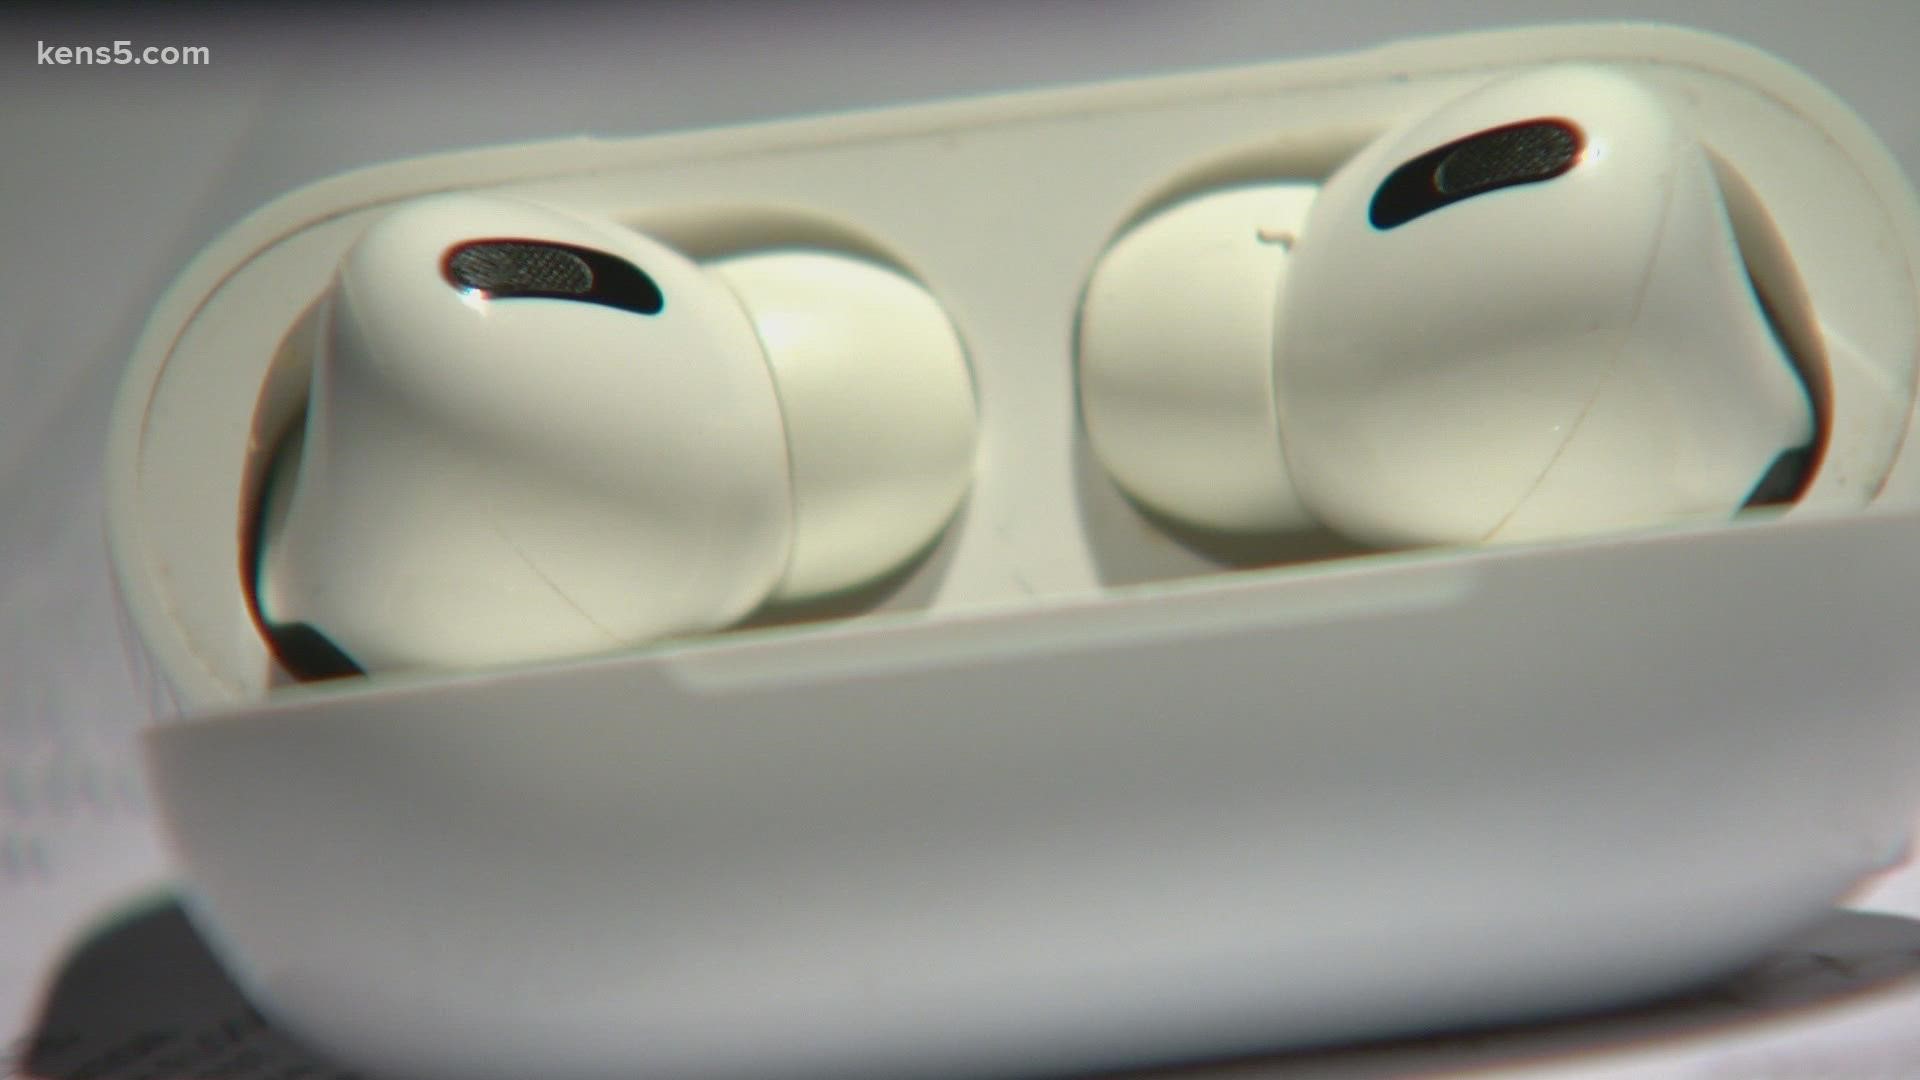 The lawsuit alleges an alert sounded at "dangerous" and "unexpected" volume through the child's AirPods Pro, rupturing his ear drum.